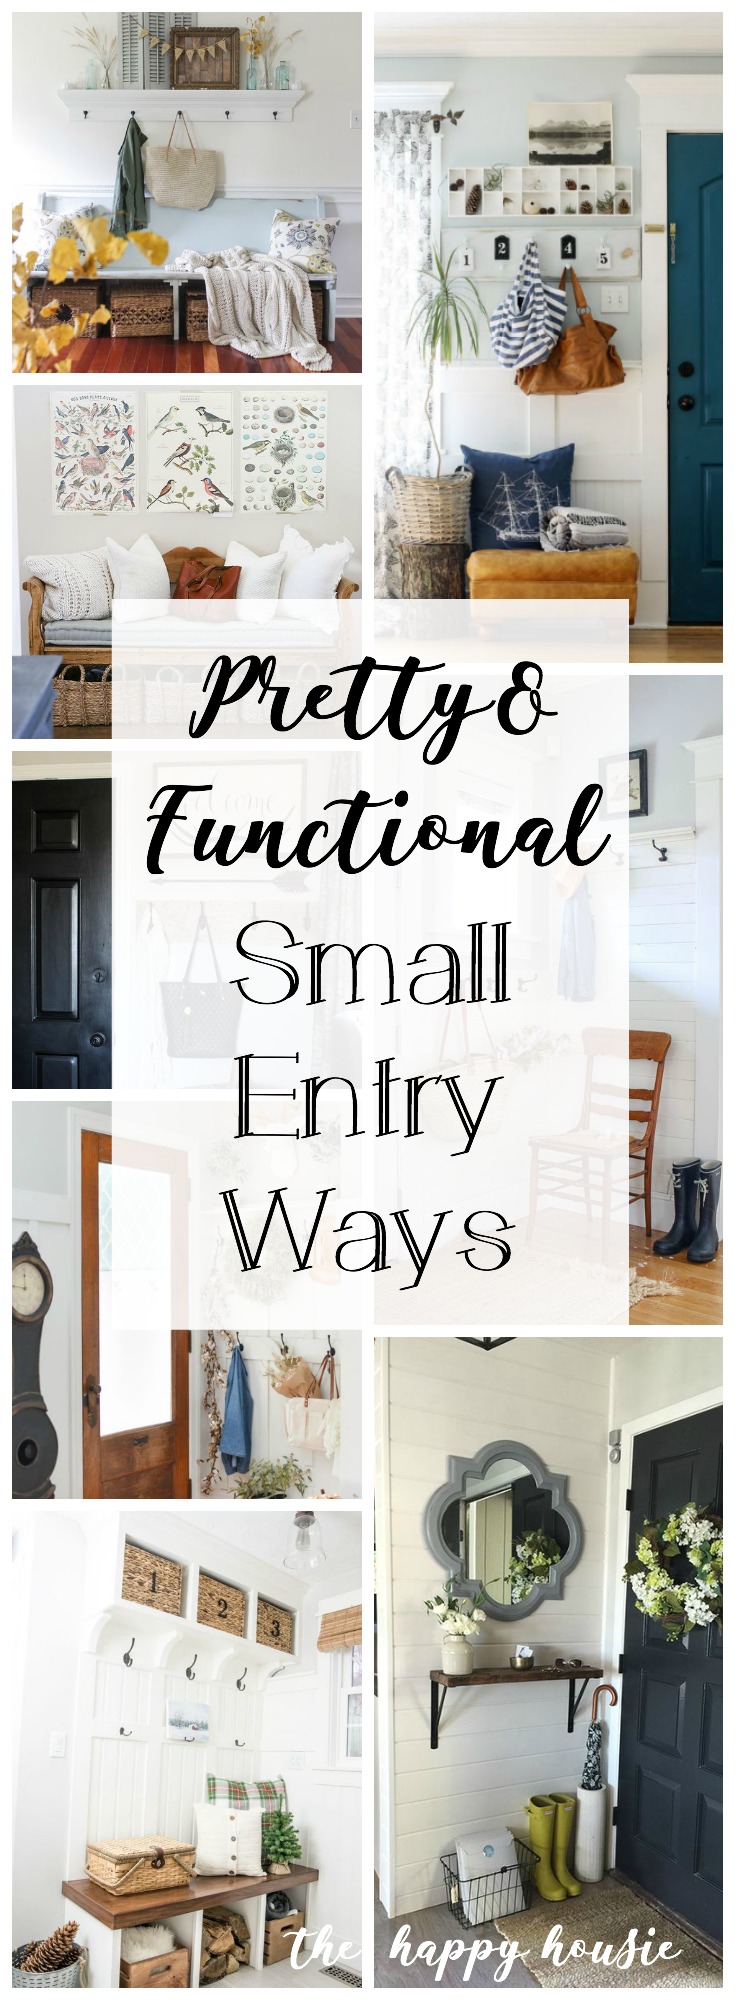 Pretty & Functional Small Entry Ways poster.